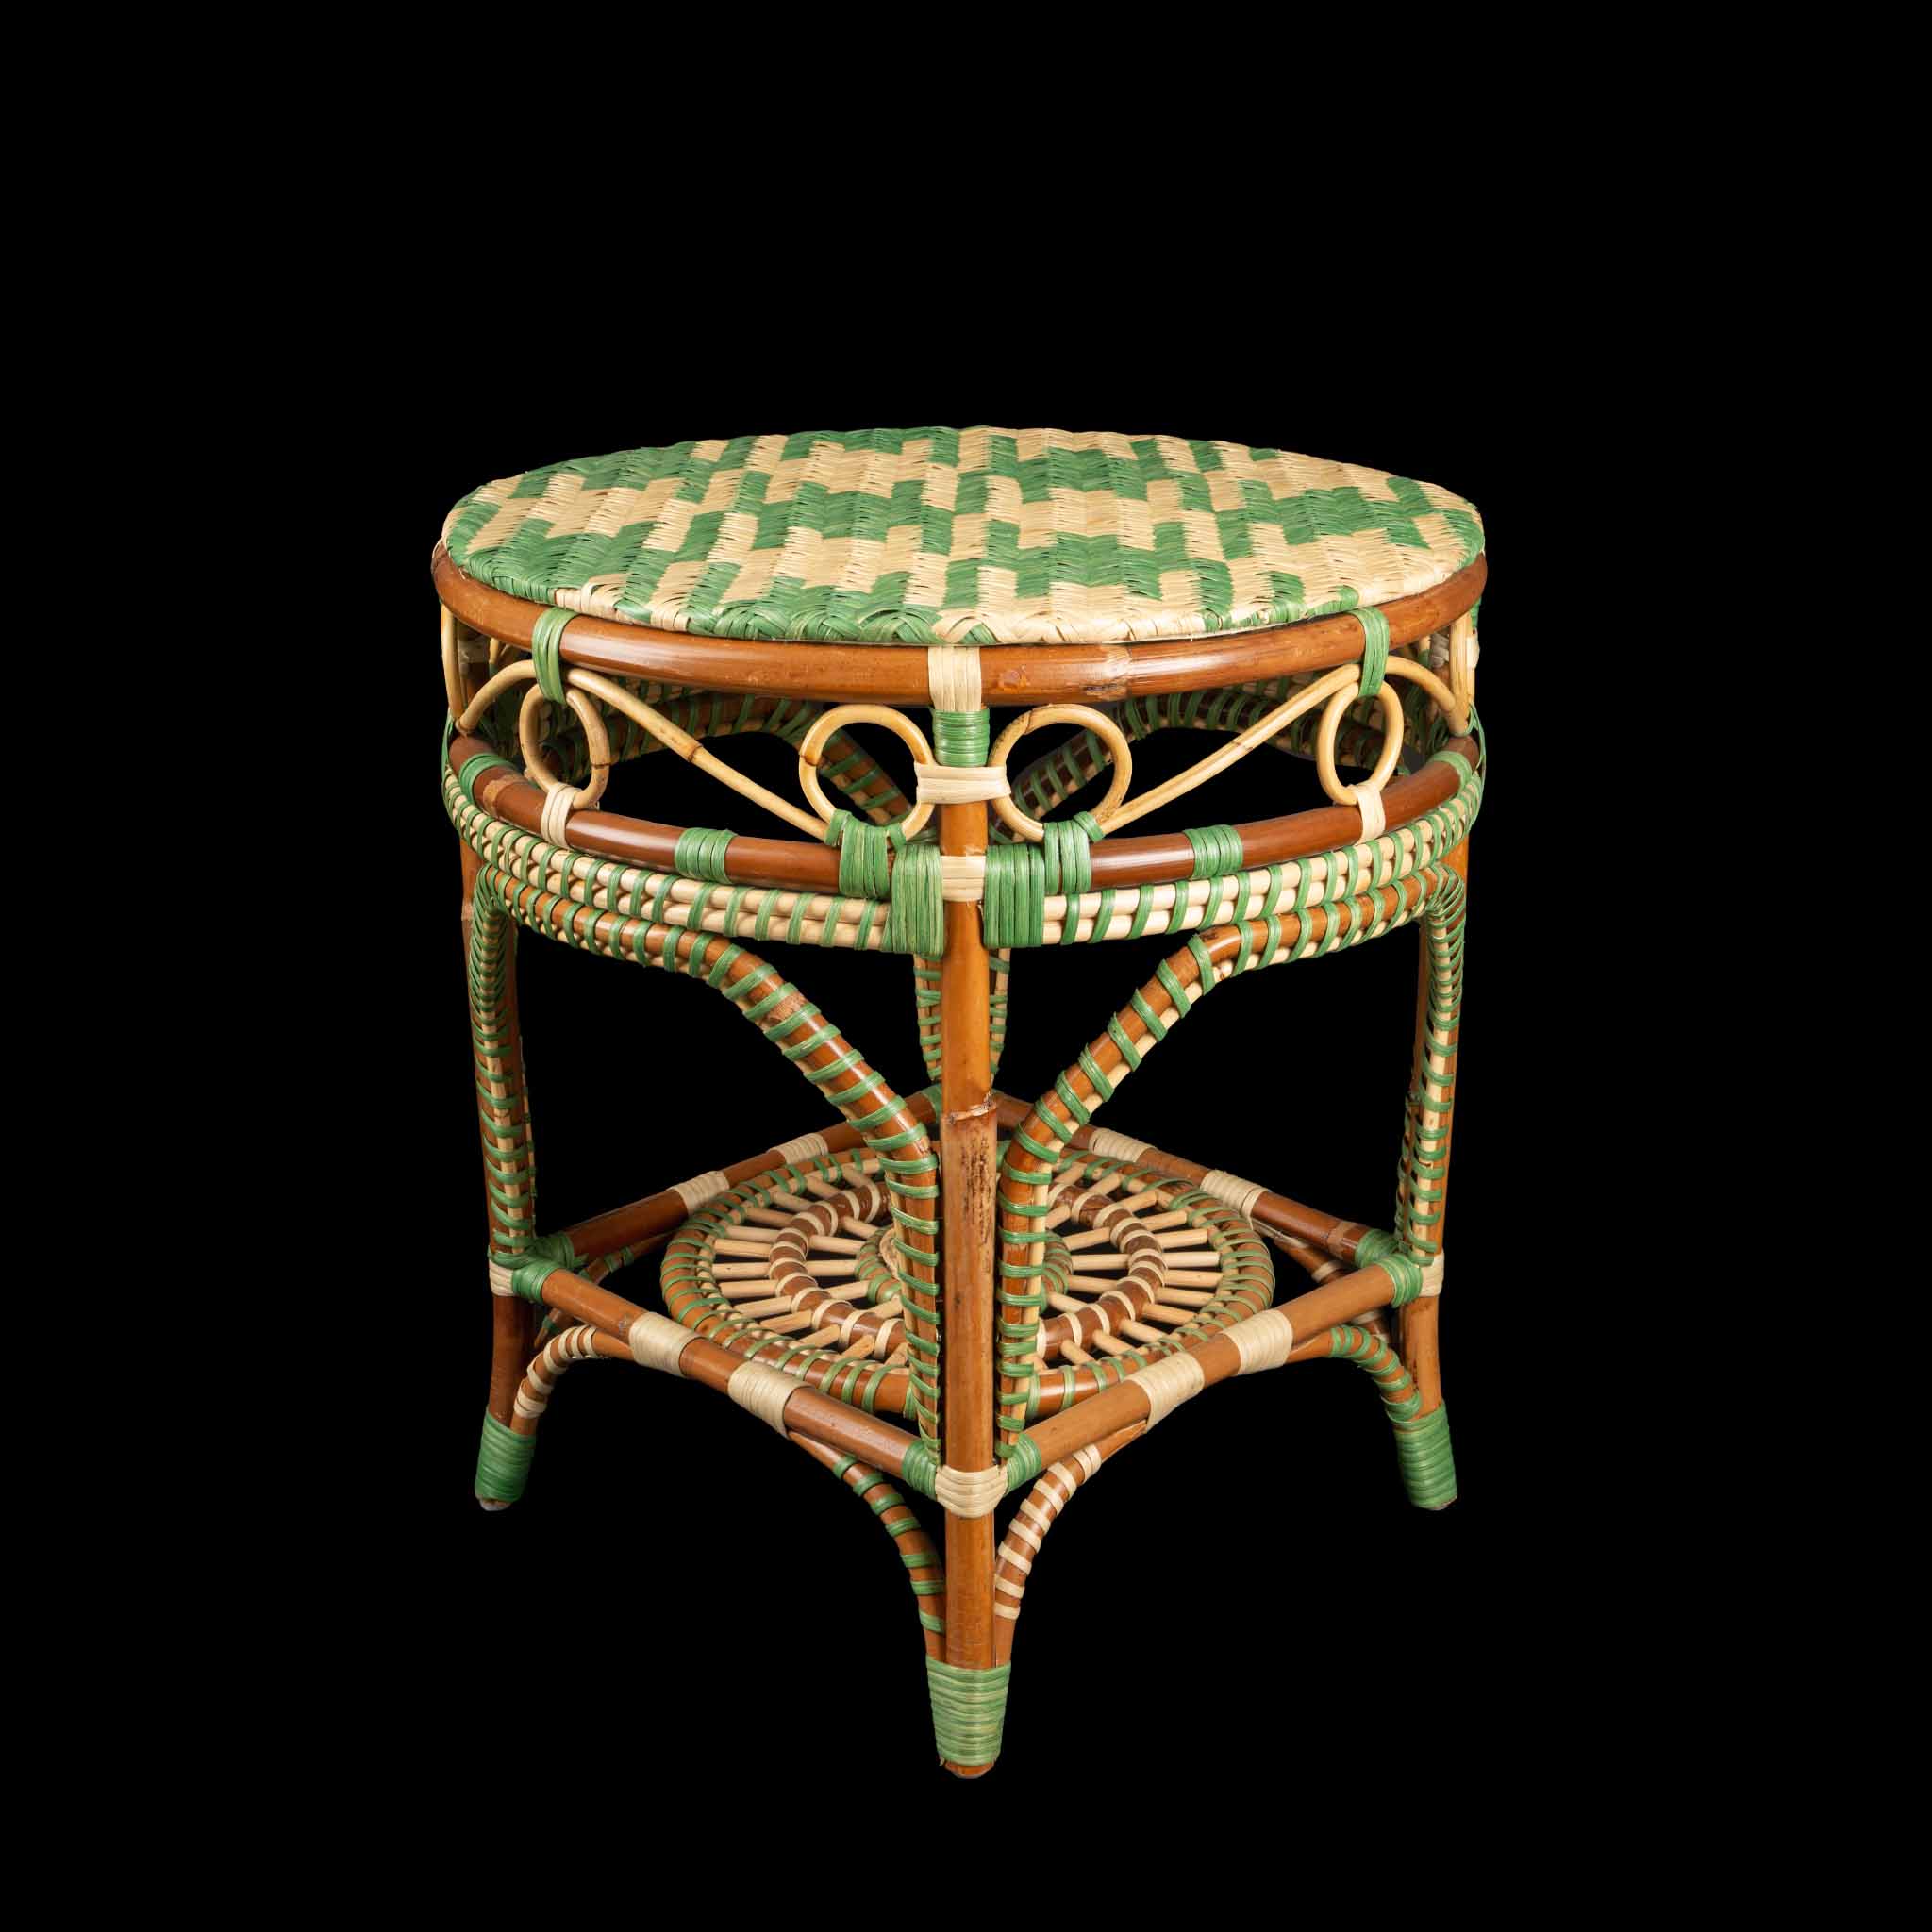 Rattan Houndstooth Side Table, Green and Cream by Creel and Gow